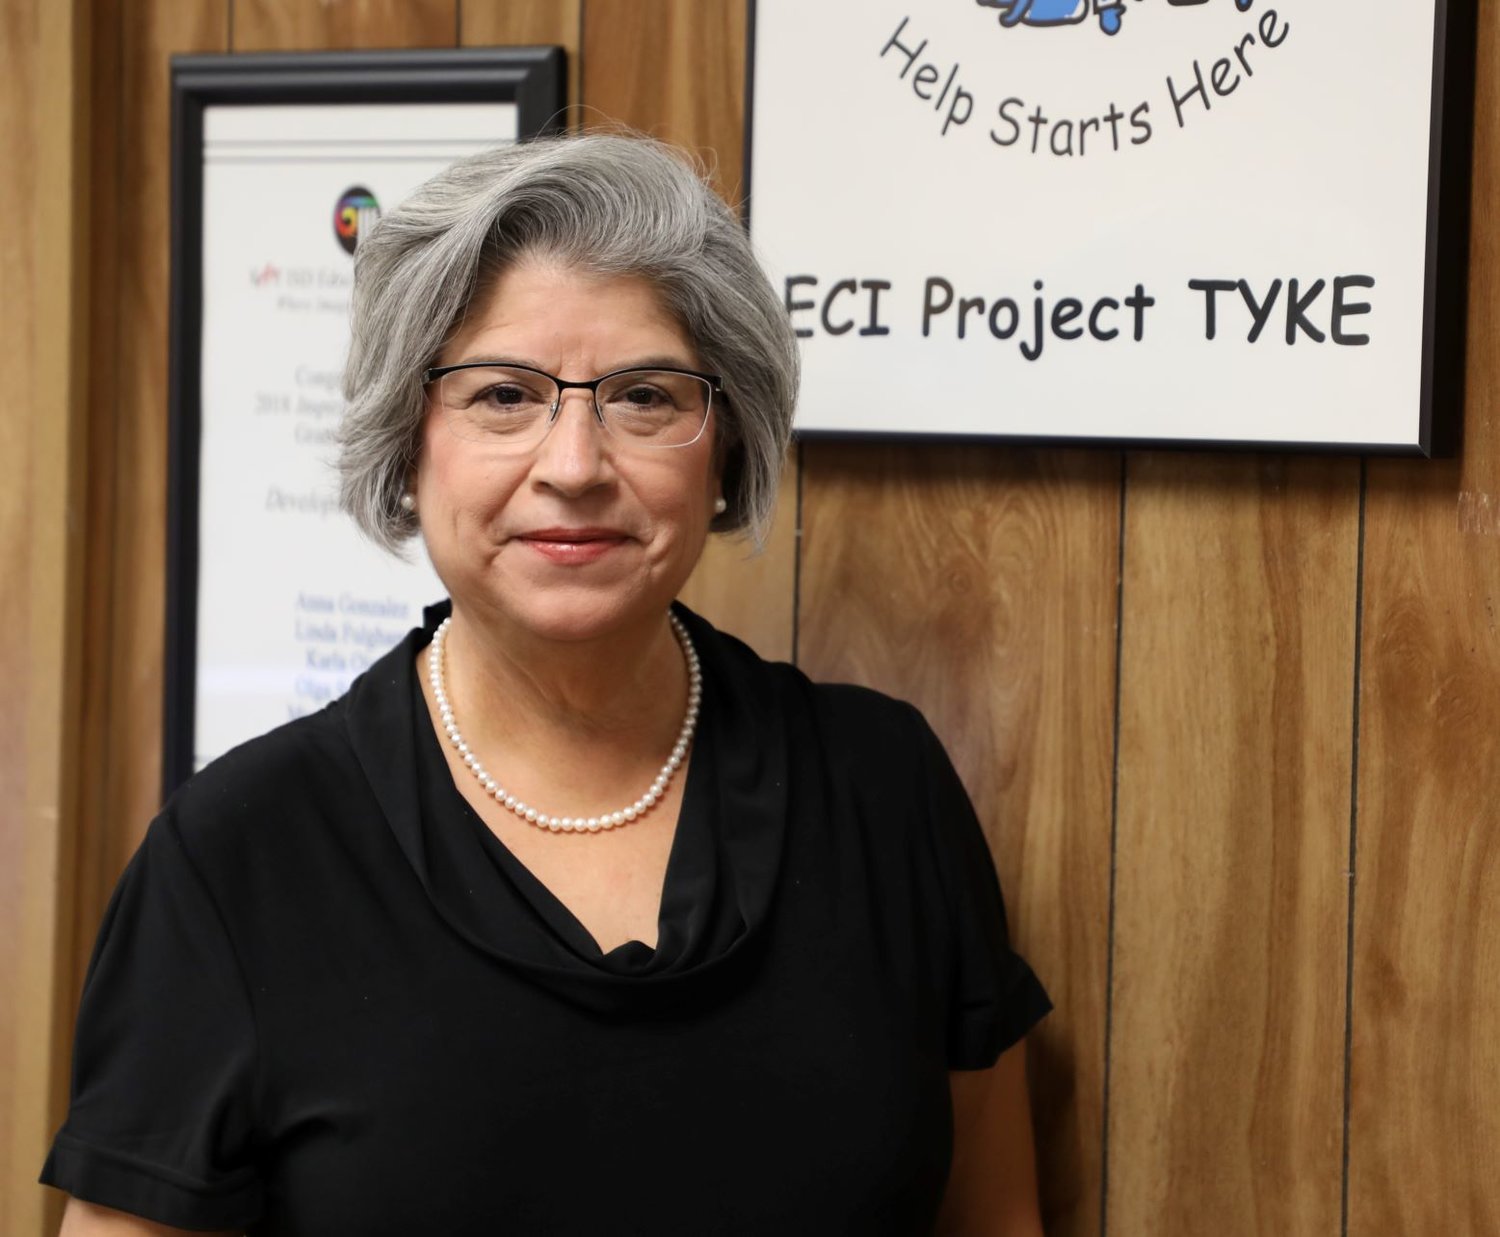 KISD’s former L.D. Robinson Pavilion will be renamed after KISD Director of Early Childhood Intervention Martha Lopez Aki who is set to retire in December. She will be replaced in her role over the ECI program by Sanee Bell the principal of Morton Ranch High School. Bell has a Doctorate of Education from the University of Houston – Clear Lake.